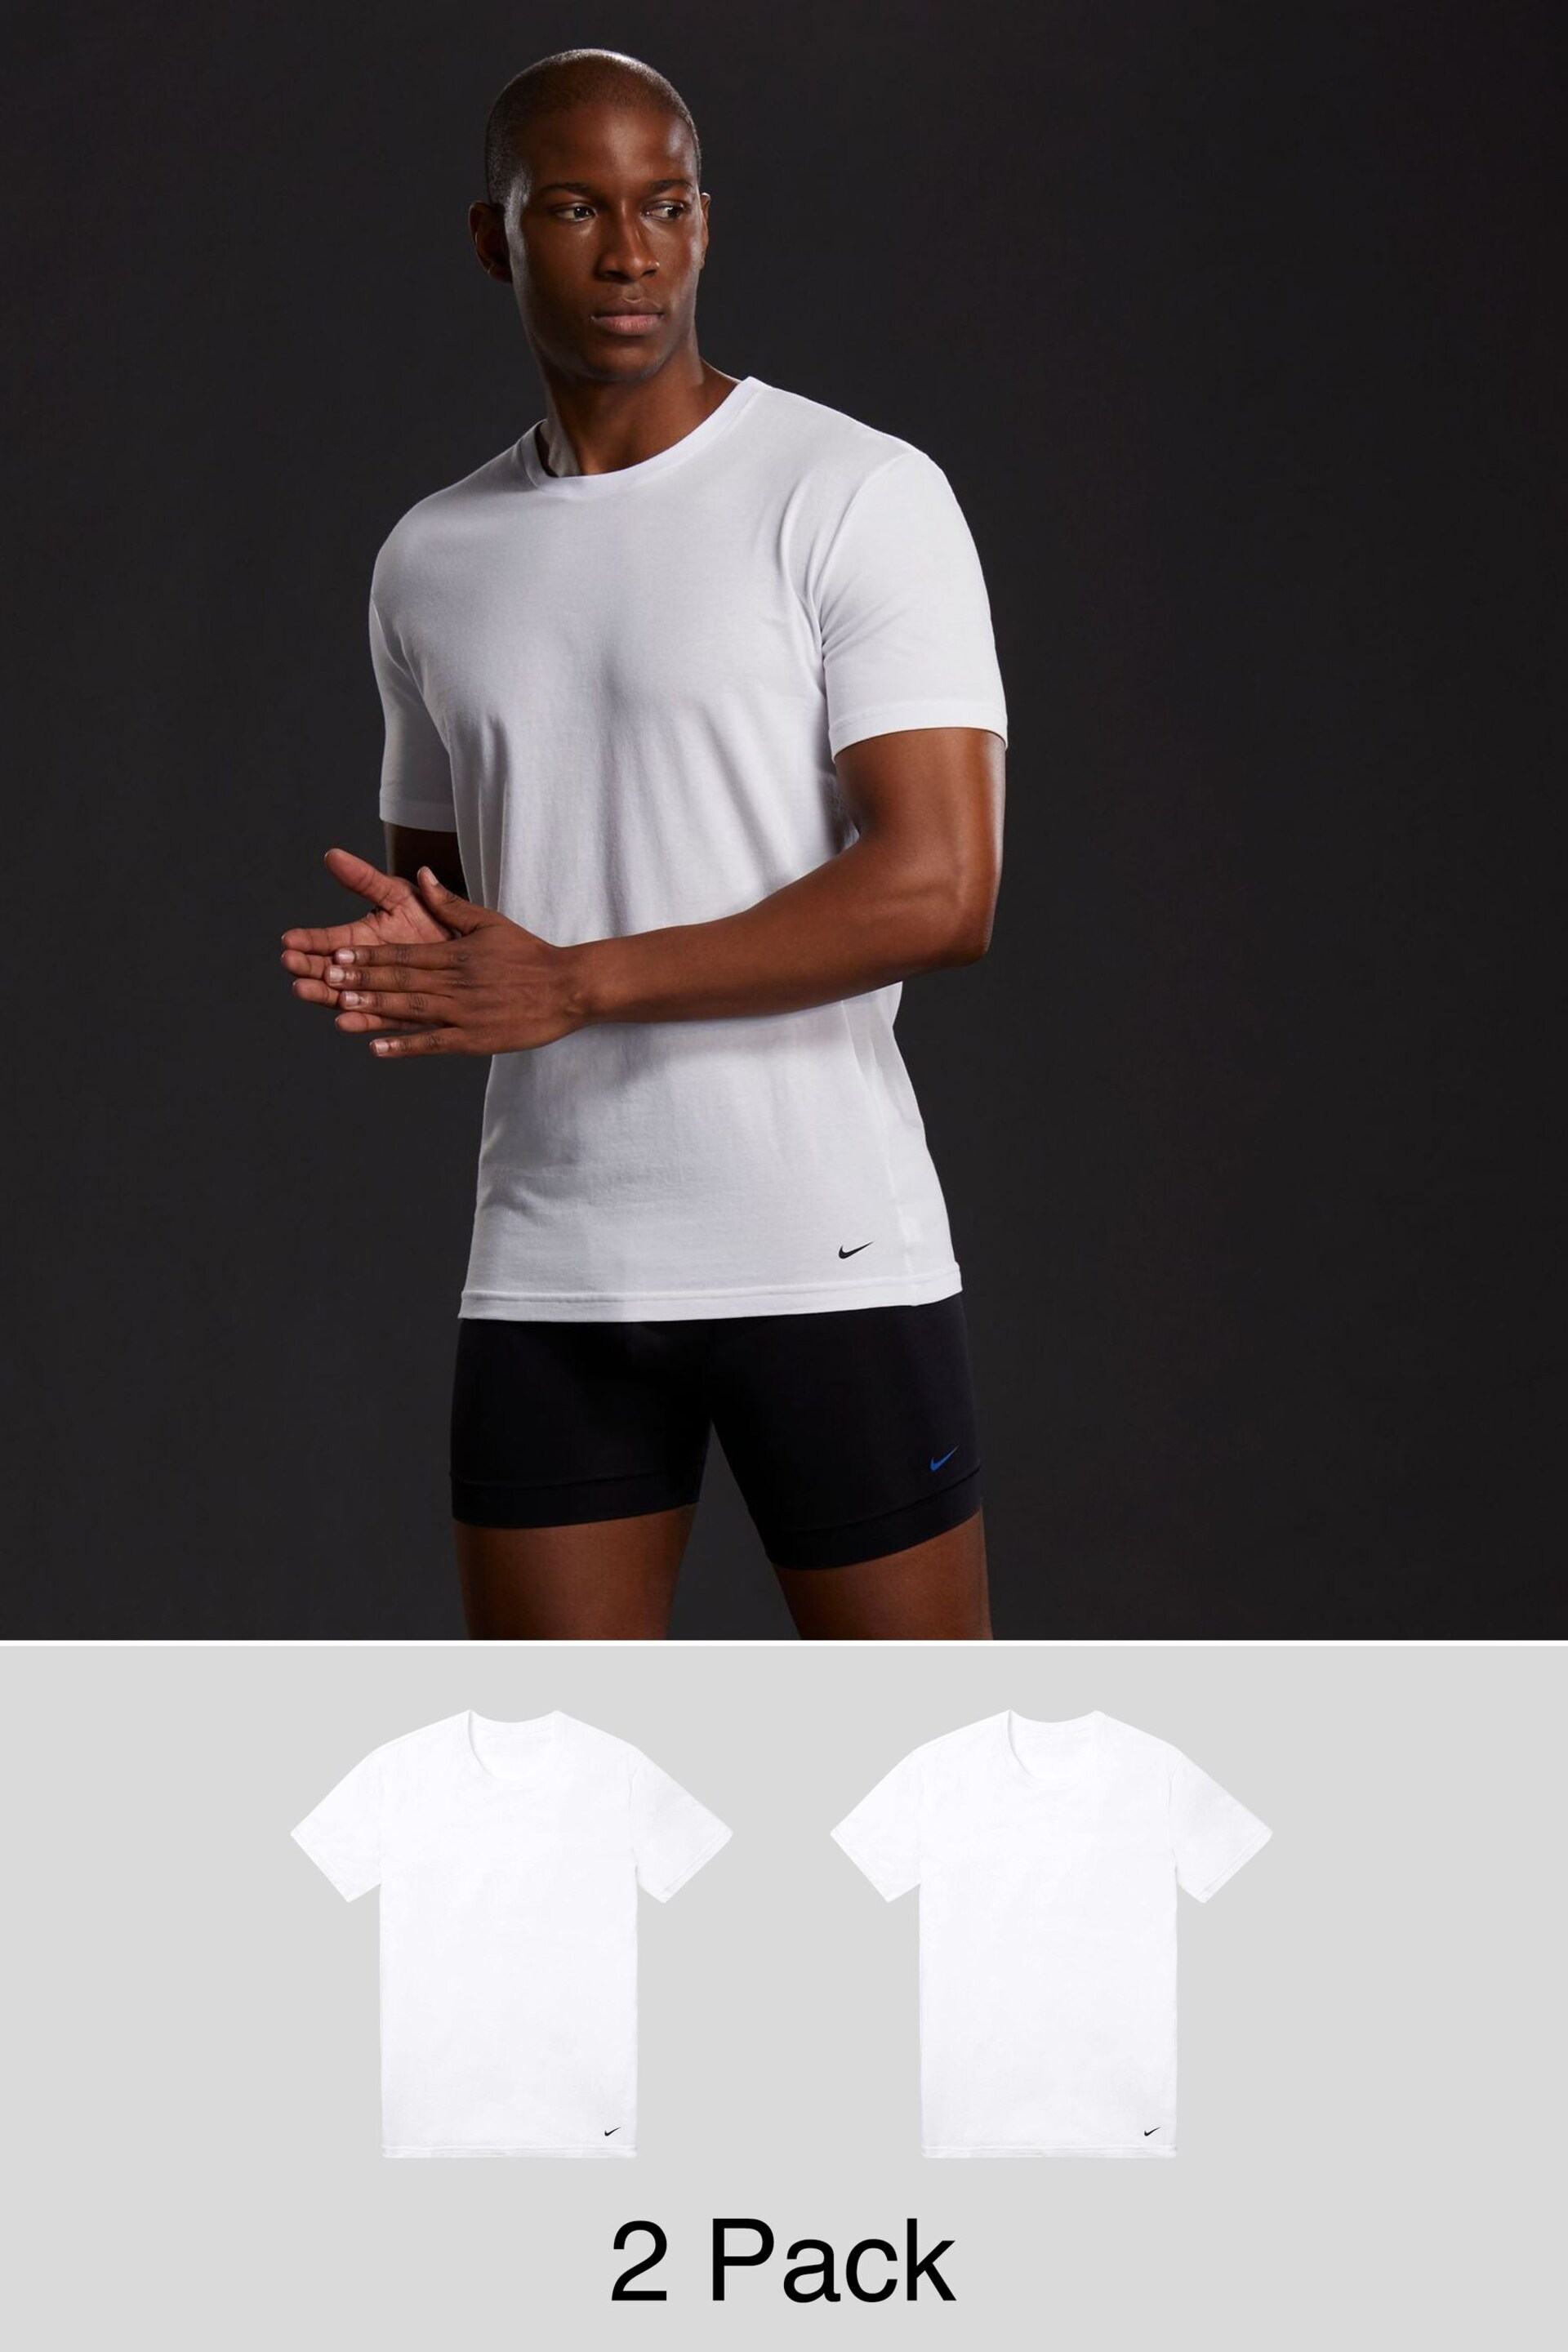 Nike White Everyday Cotton Stretch T-Shirts 2 Pack - Image 1 of 2